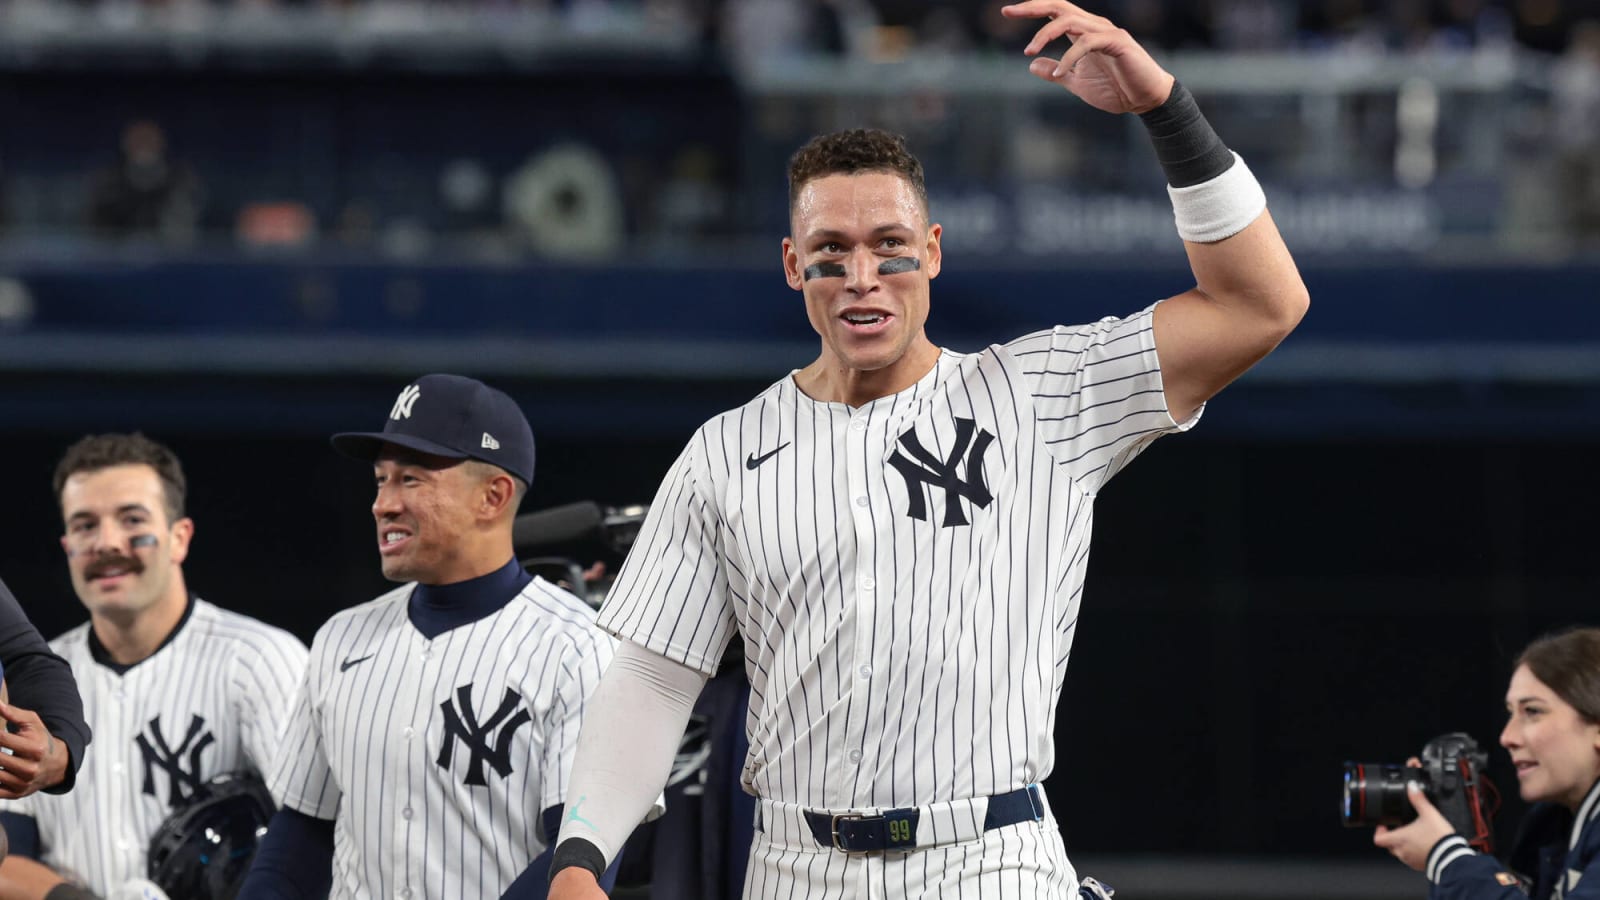 Yankees stun the Tigers with ninth-inning rally to secure 2-1 win